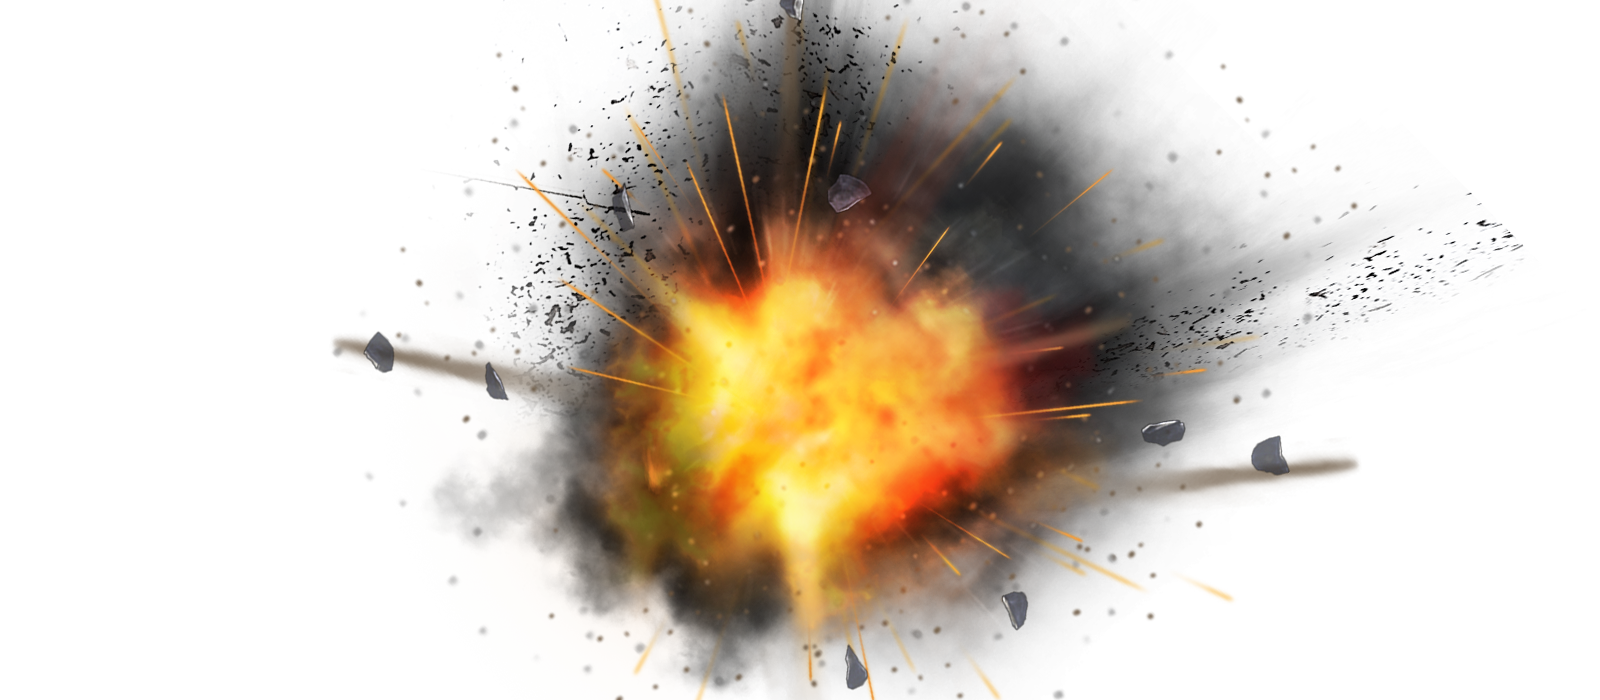 Atomic Explosion Transparent Background, Explosion PNG HD - Free PNG